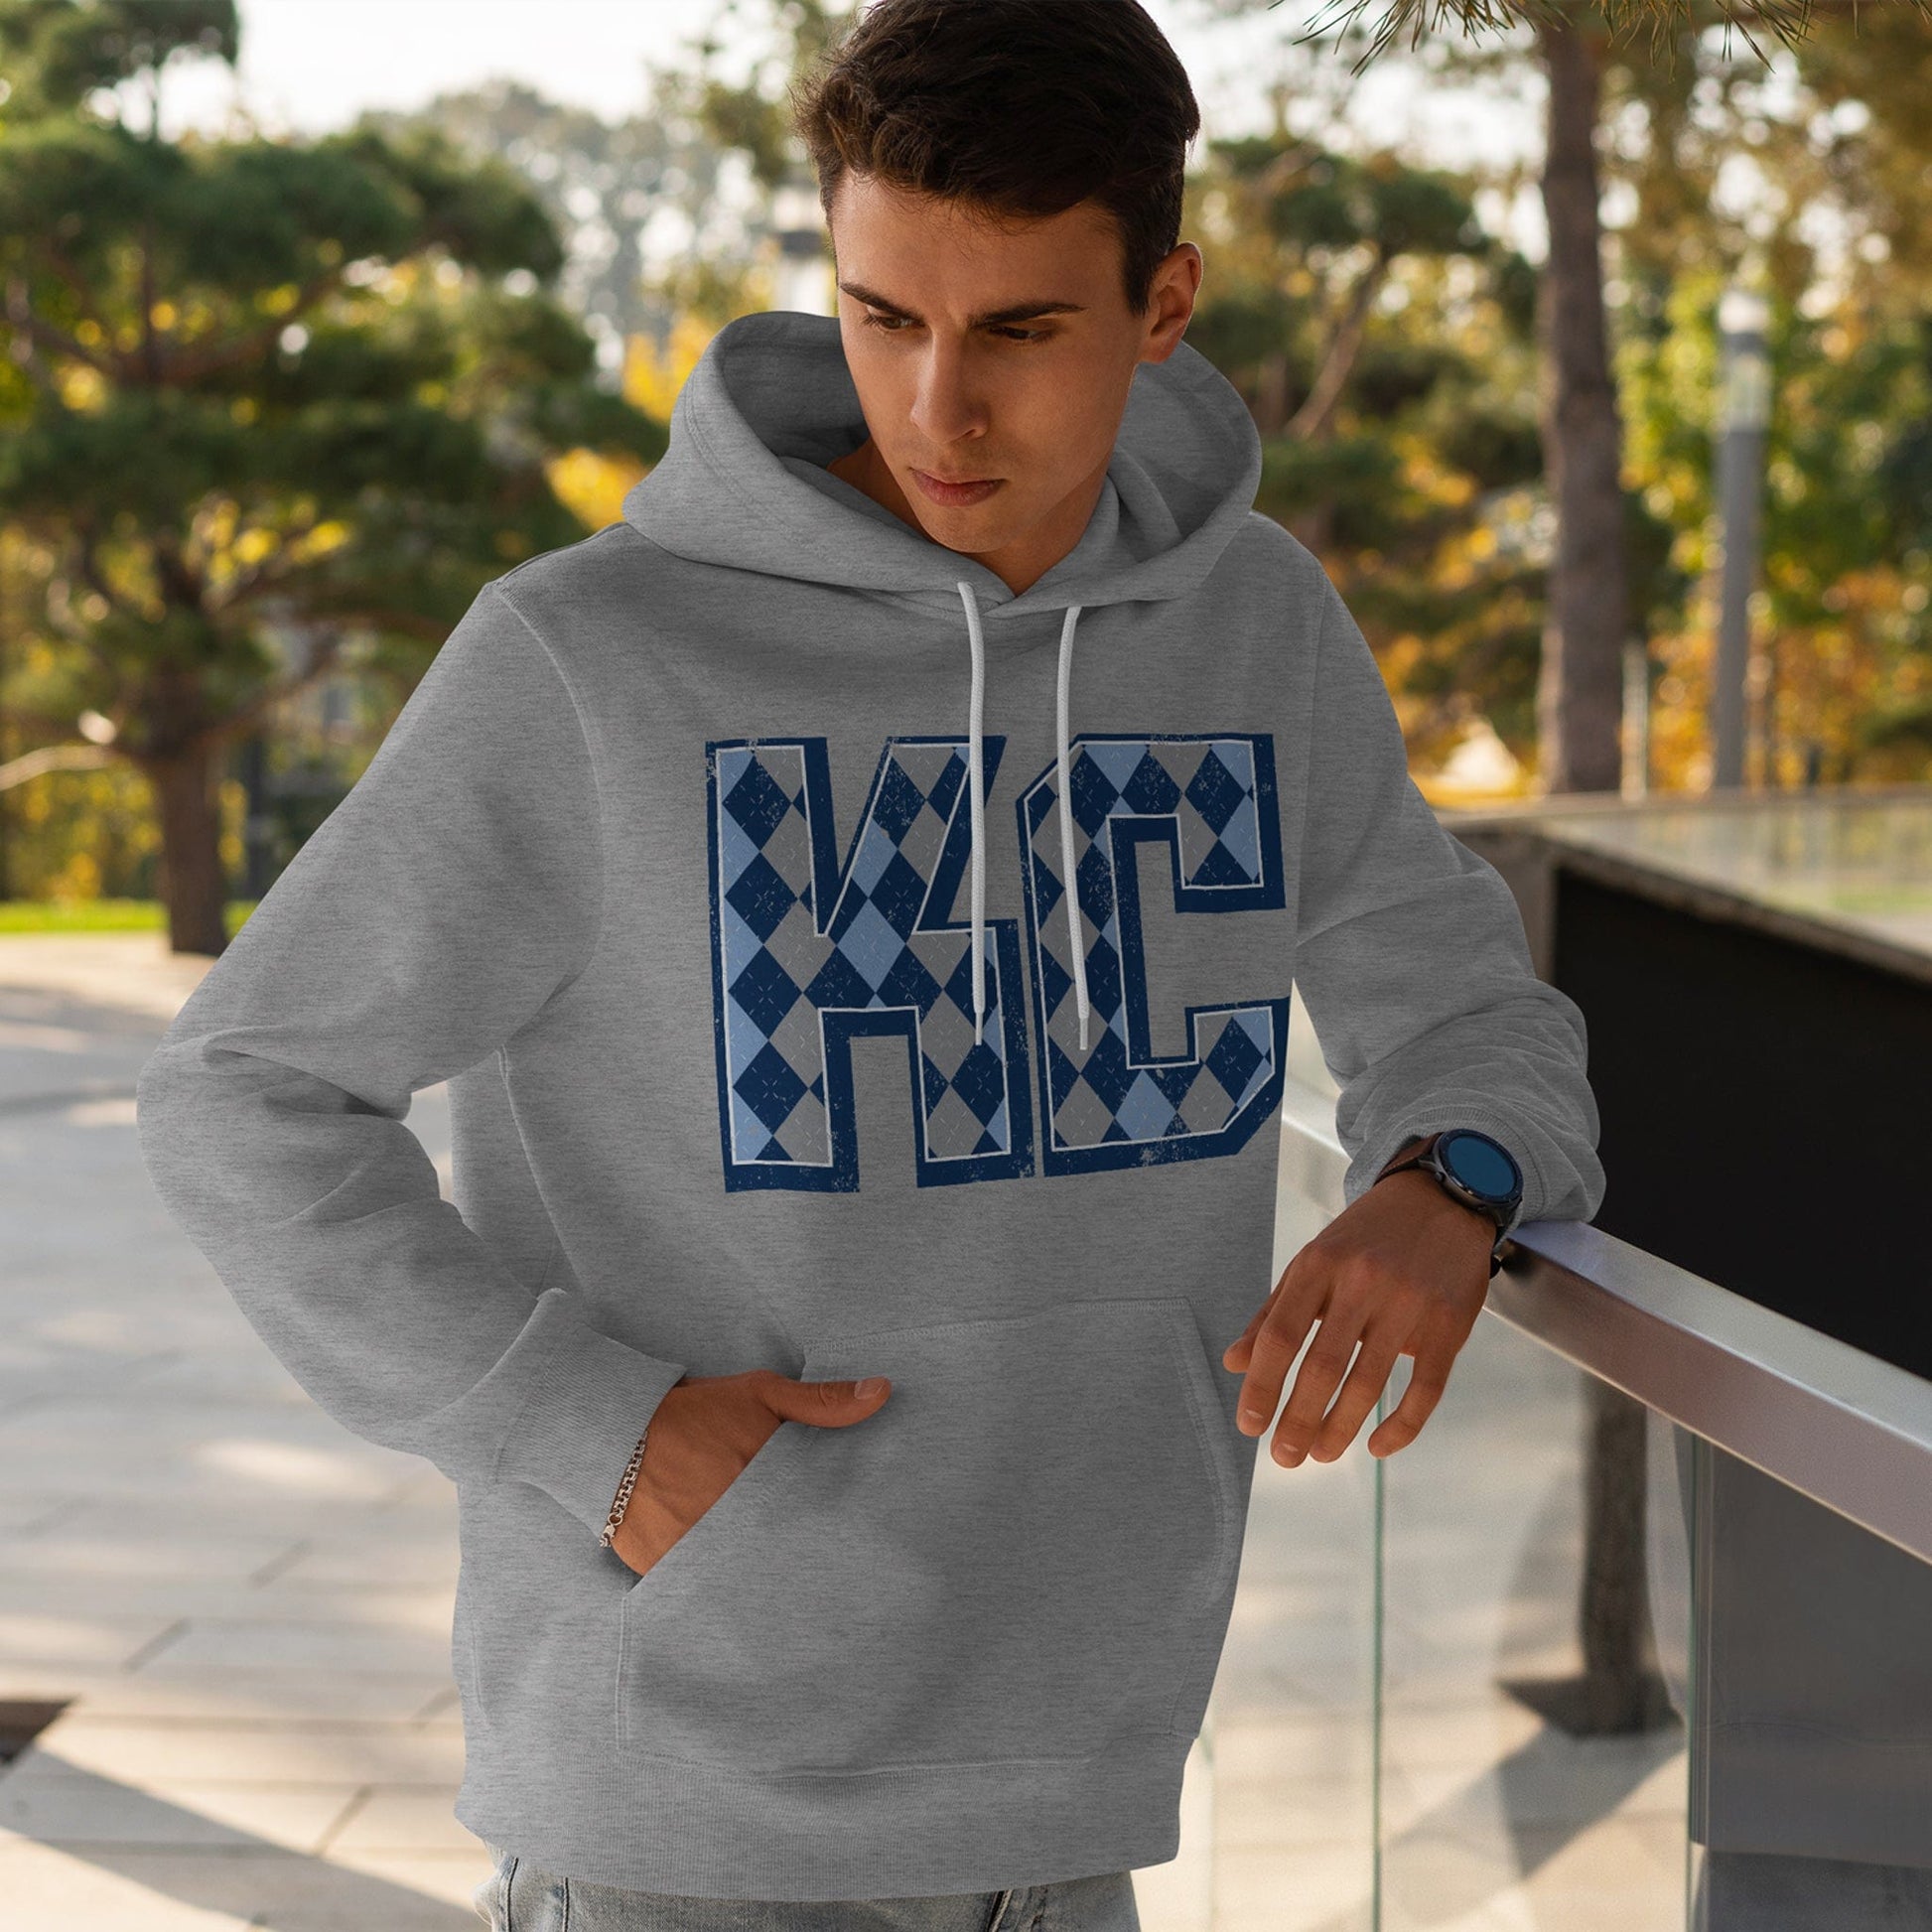 KC Swag Sporting Kansas City powder blue/navy/grey/white ARGYLE pattern KC on athletic heather grey fleece pull-over hoodie worn by male model leaning on rail in outdoor plaza